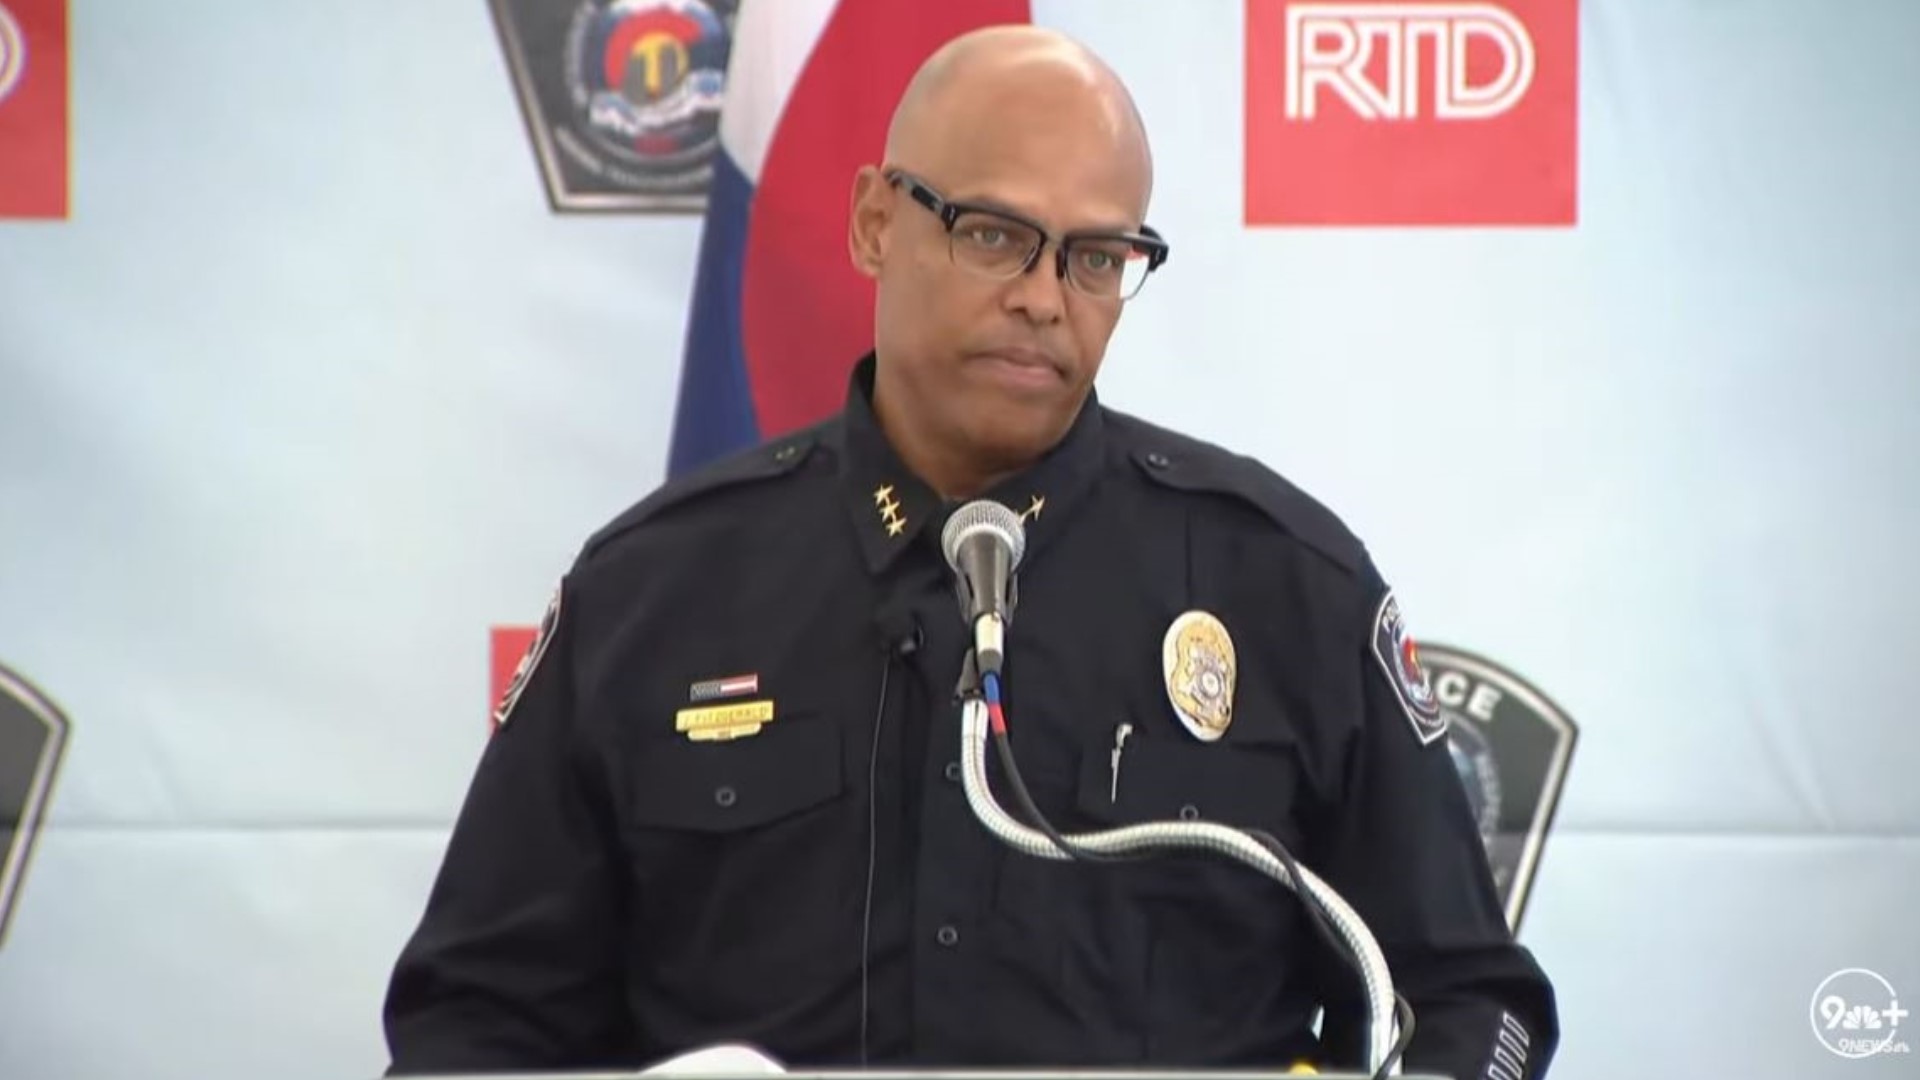 RTD selected Dr. Joel Fitzgerald Sr. as Chief of Police and Emergency Management to head the agency.